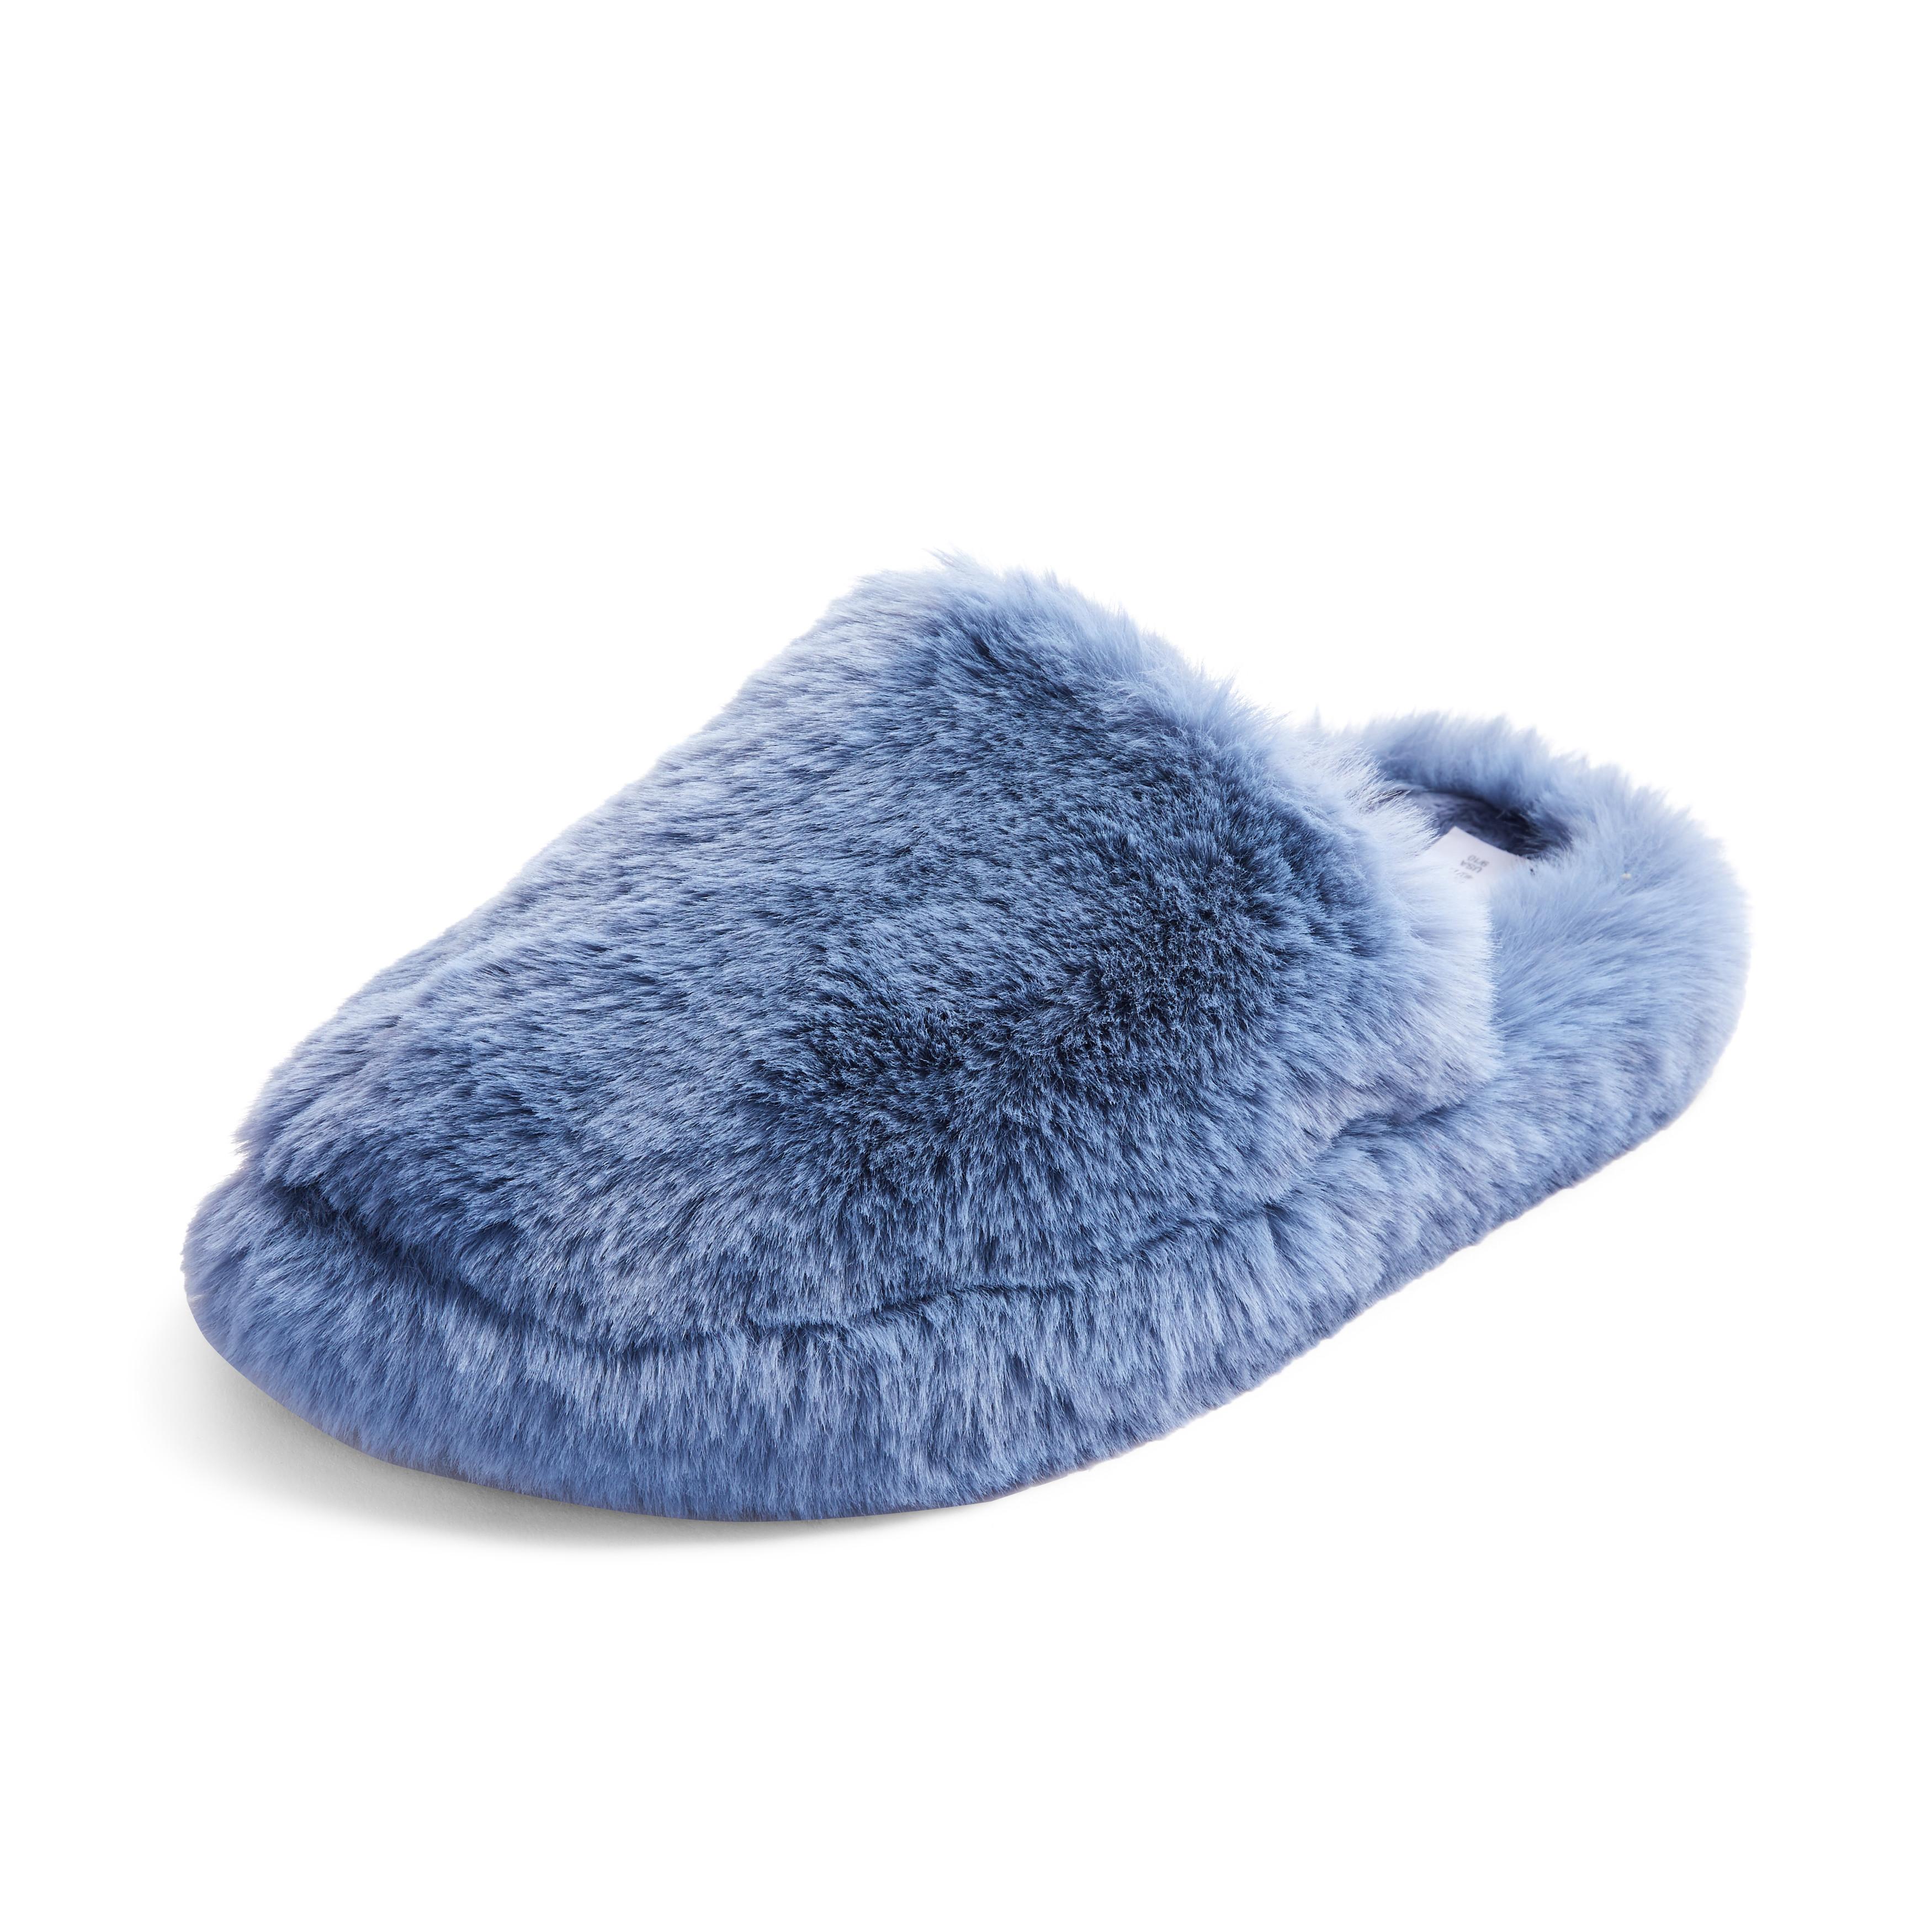 Emigrere komme til syne analog Blue Faux Fur Fluffy Mule Slippers | Women's Slippers | Women's Shoes &  Boots | Our Women's Fashion Range | All Primark Products | Primark UK